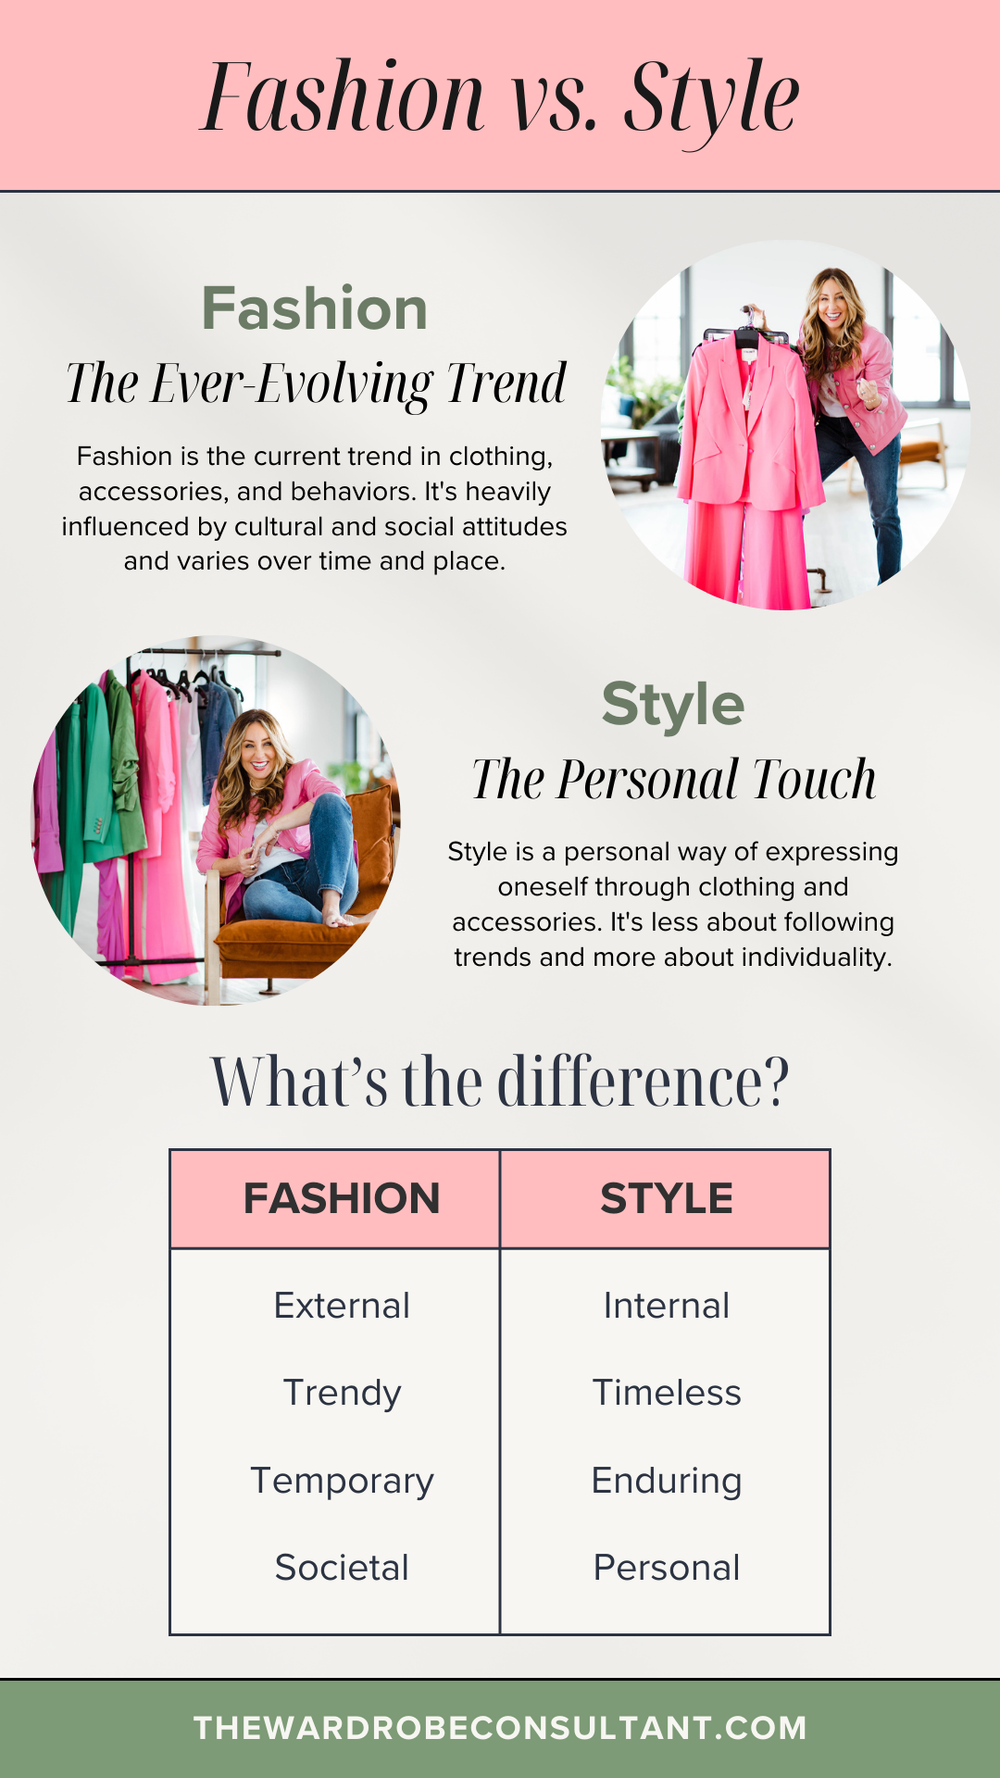 Fashion vs. Style: What is the Difference? — The Wardrobe Consultant